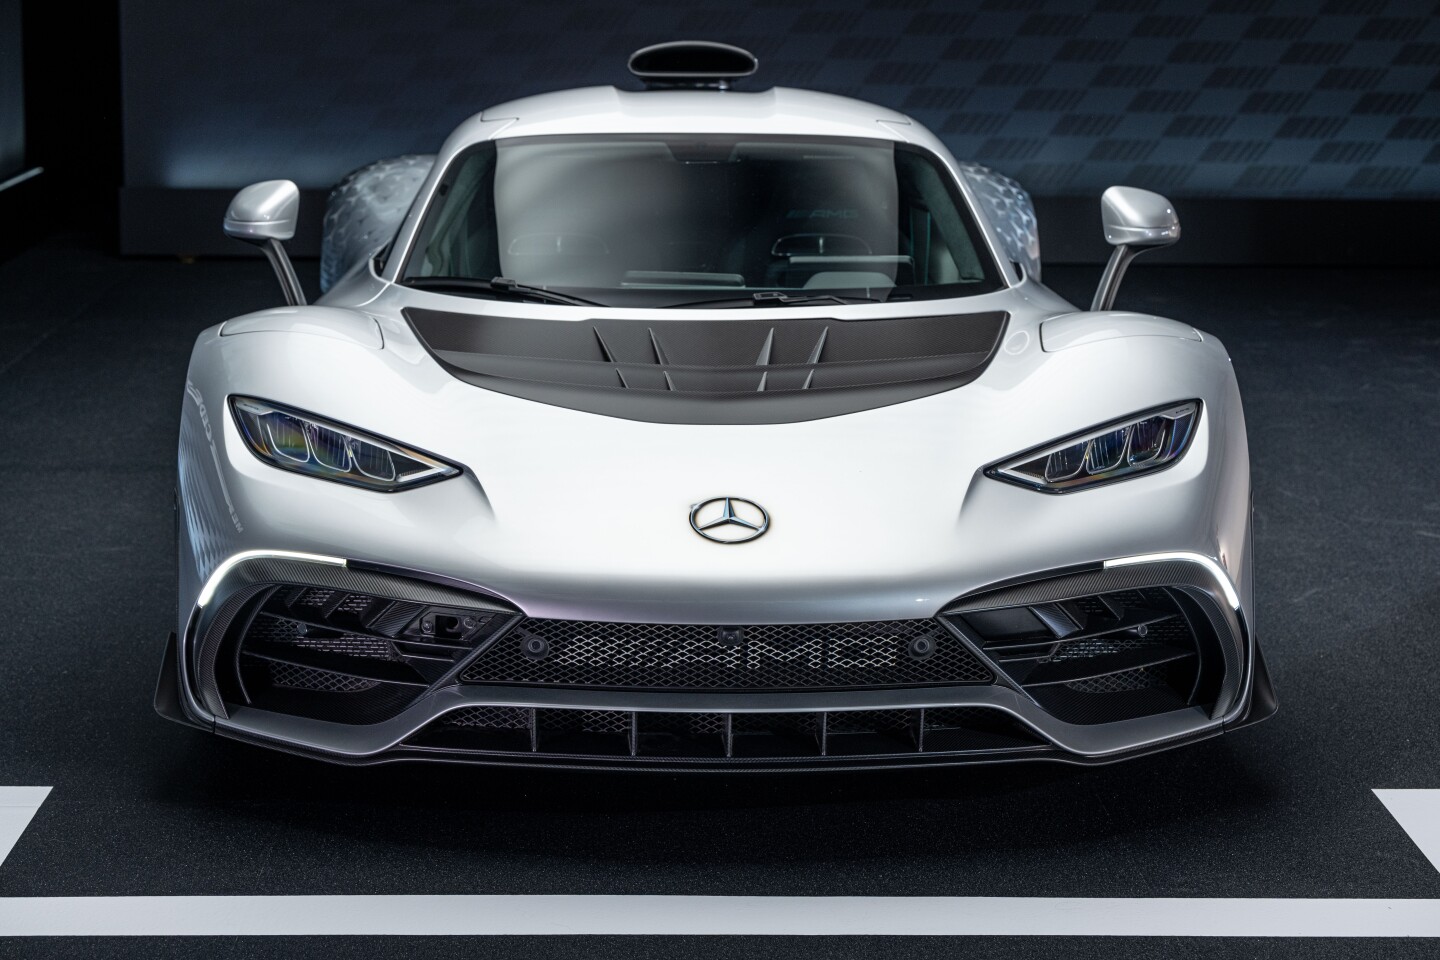 The Mercedes-Benz ONE has a top speed of 352 km/h